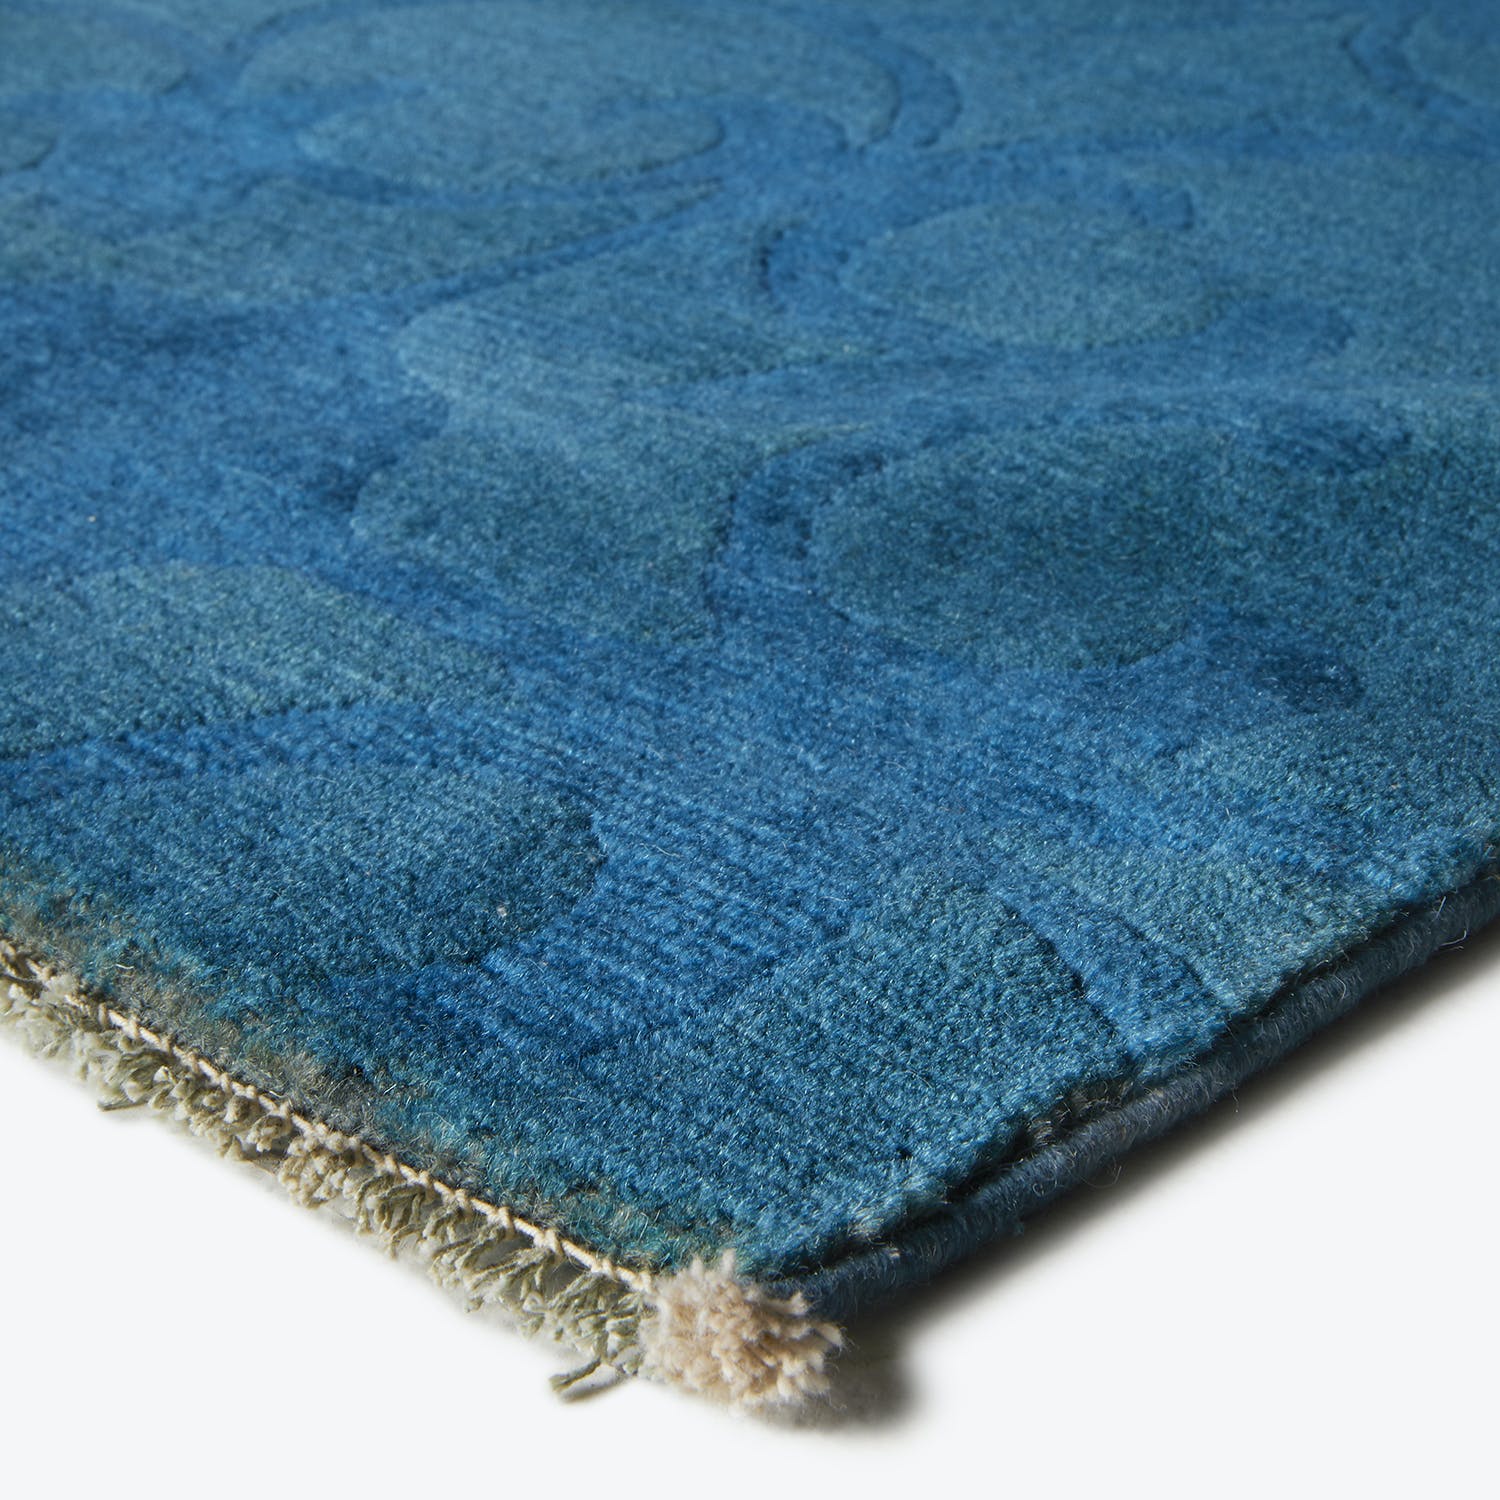 Vibrant blue plush rug with textured pattern, handmade and luxurious.